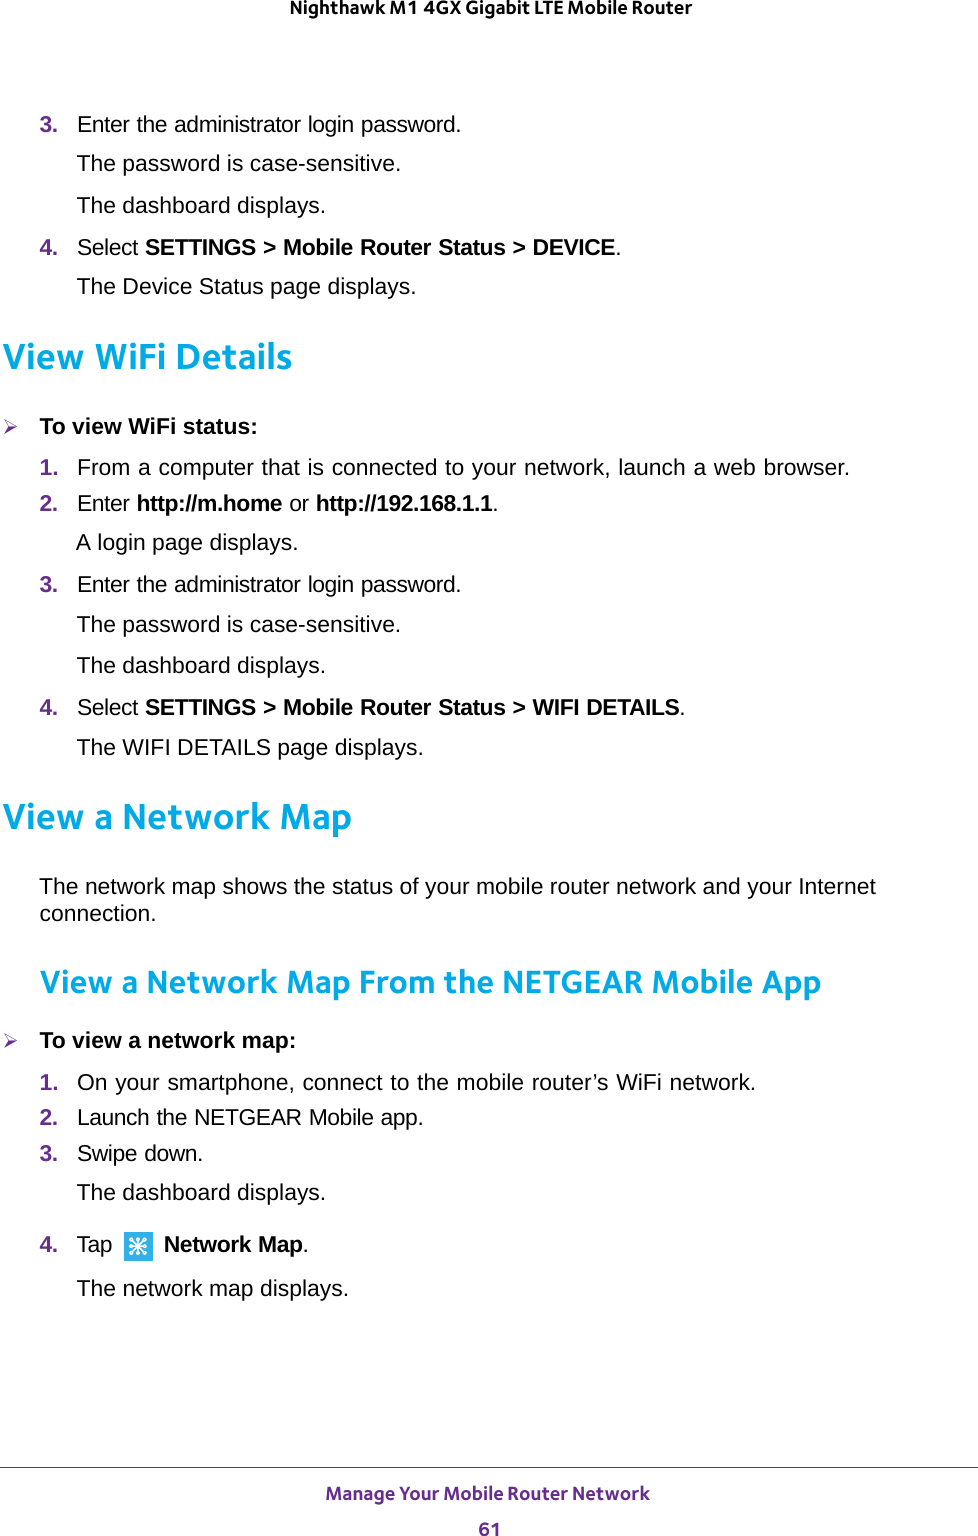 Manage Your Mobile Router Network 61 Nighthawk M1 4GX Gigabit LTE Mobile Router3.  Enter the administrator login password.The password is case-sensitive.The dashboard displays.4.  Select SETTINGS &gt; Mobile Router Status &gt; DEVICE.The Device Status page displays. View WiFi DetailsTo view WiFi status:1.  From a computer that is connected to your network, launch a web browser.2.  Enter http://m.home or http://192.168.1.1.A login page displays.3.  Enter the administrator login password.The password is case-sensitive.The dashboard displays.4.  Select SETTINGS &gt; Mobile Router Status &gt; WIFI DETAILS.The WIFI DETAILS page displays. View a Network MapThe network map shows the status of your mobile router network and your Internet connection.View a Network Map From the NETGEAR Mobile AppTo view a network map:1.  On your smartphone, connect to the mobile router’s WiFi network.2.  Launch the NETGEAR Mobile app.3.  Swipe down.The dashboard displays.4.  Tap   Network Map.The network map displays.